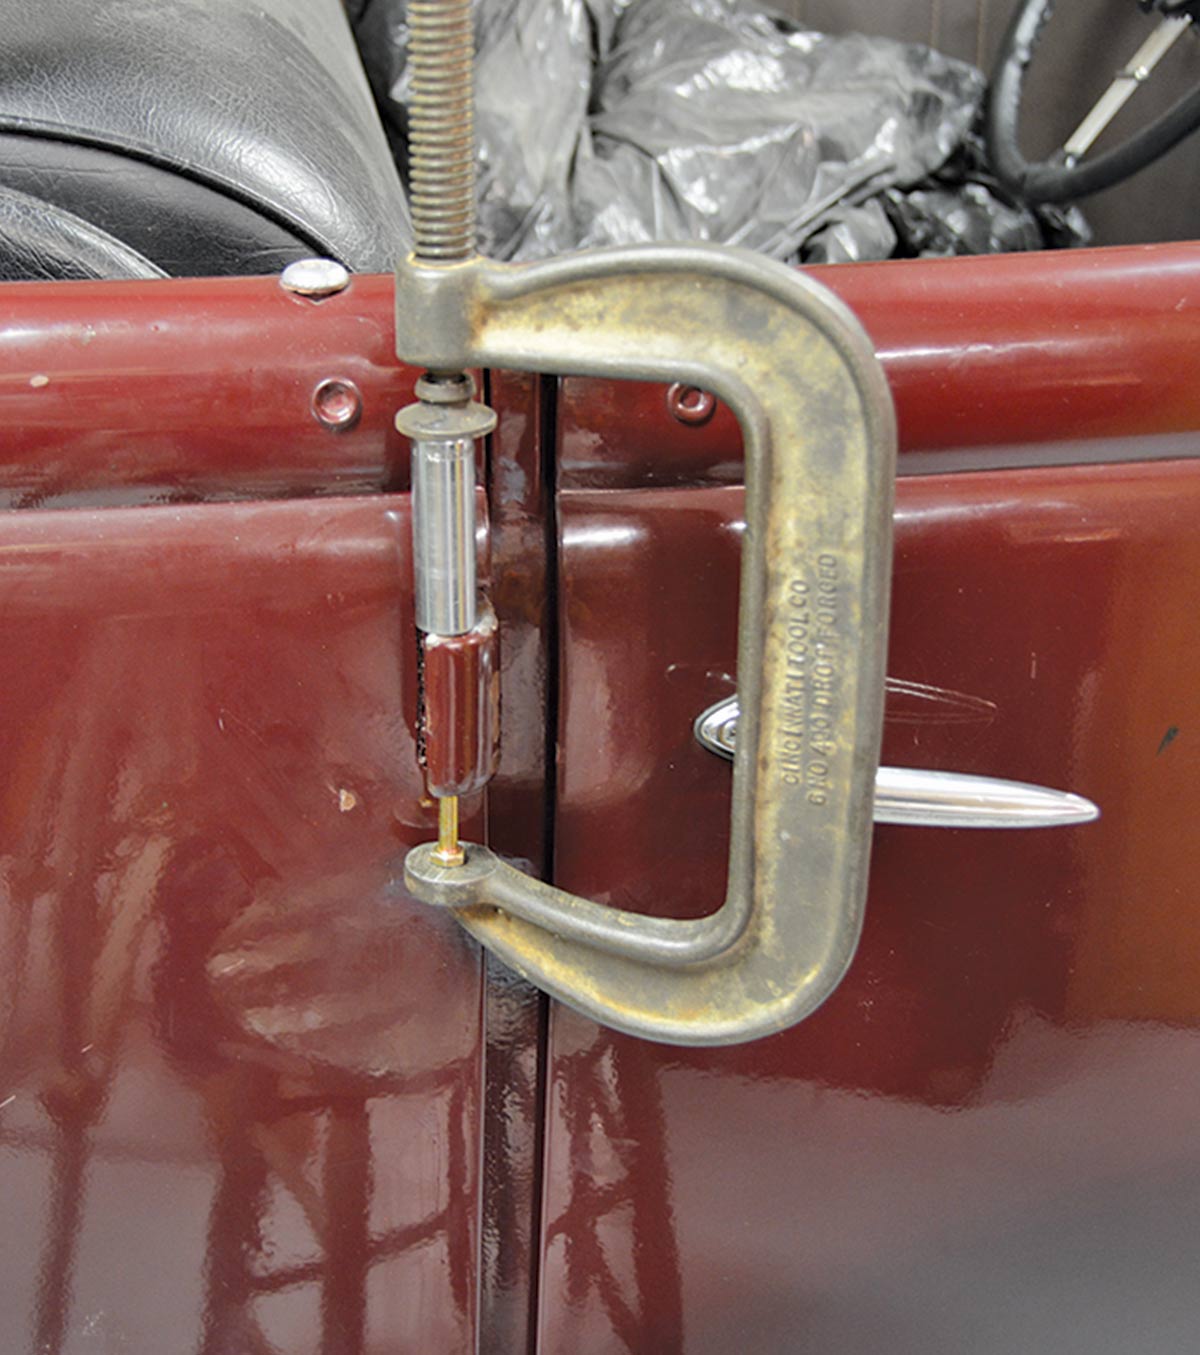 A large C-clamp put the squeeze on the bolt and pin